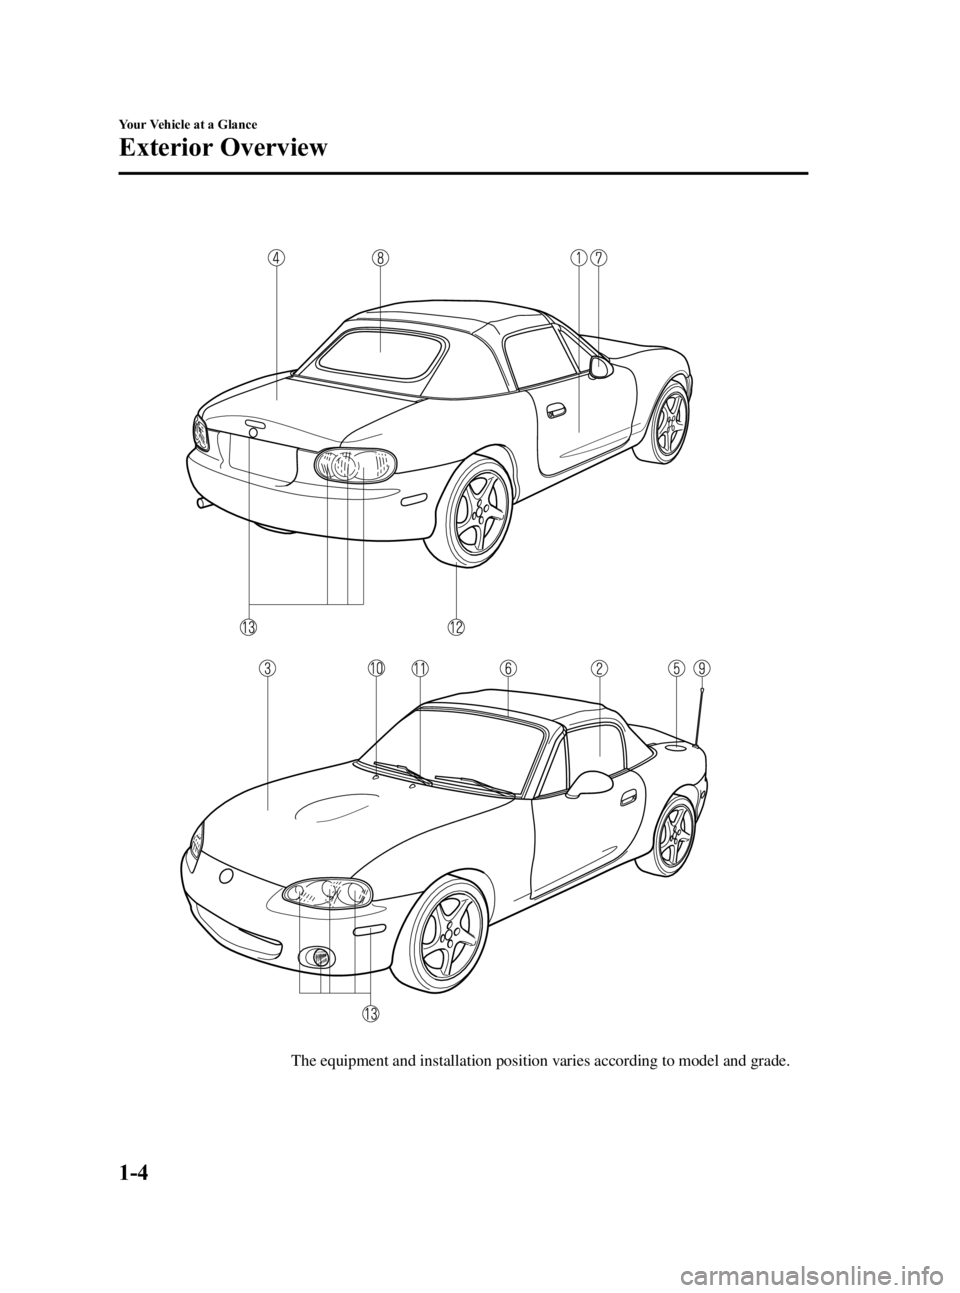 MAZDA MODEL SPEED MX-5 MIATA 2005  Owners Manual Black plate (10,1)
The equipment and installation position varies according to model and grade.
1-4
Your Vehicle at a Glance
Exterior Overview
MX-5 Miata_8T72-EA-04G_Edition2 Page10
Tuesday, August 31